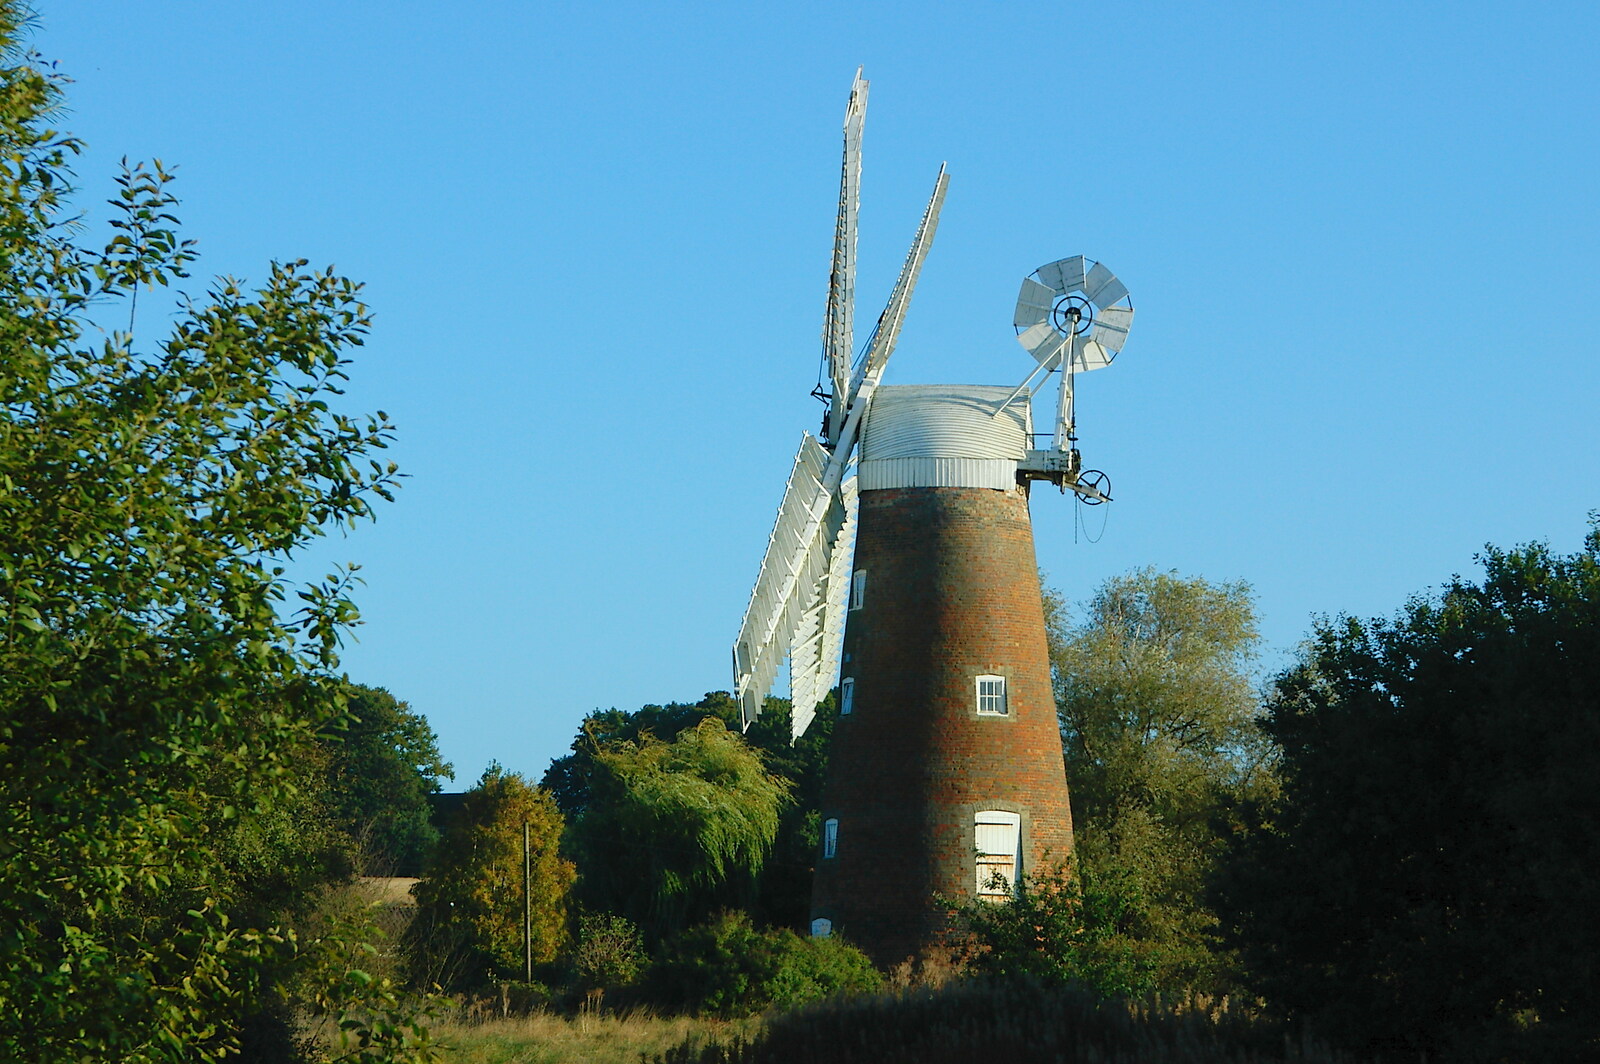 Jo and Steph's Party, Burston, Norfolk - 30th September 2005: Billingford Windmill from the side